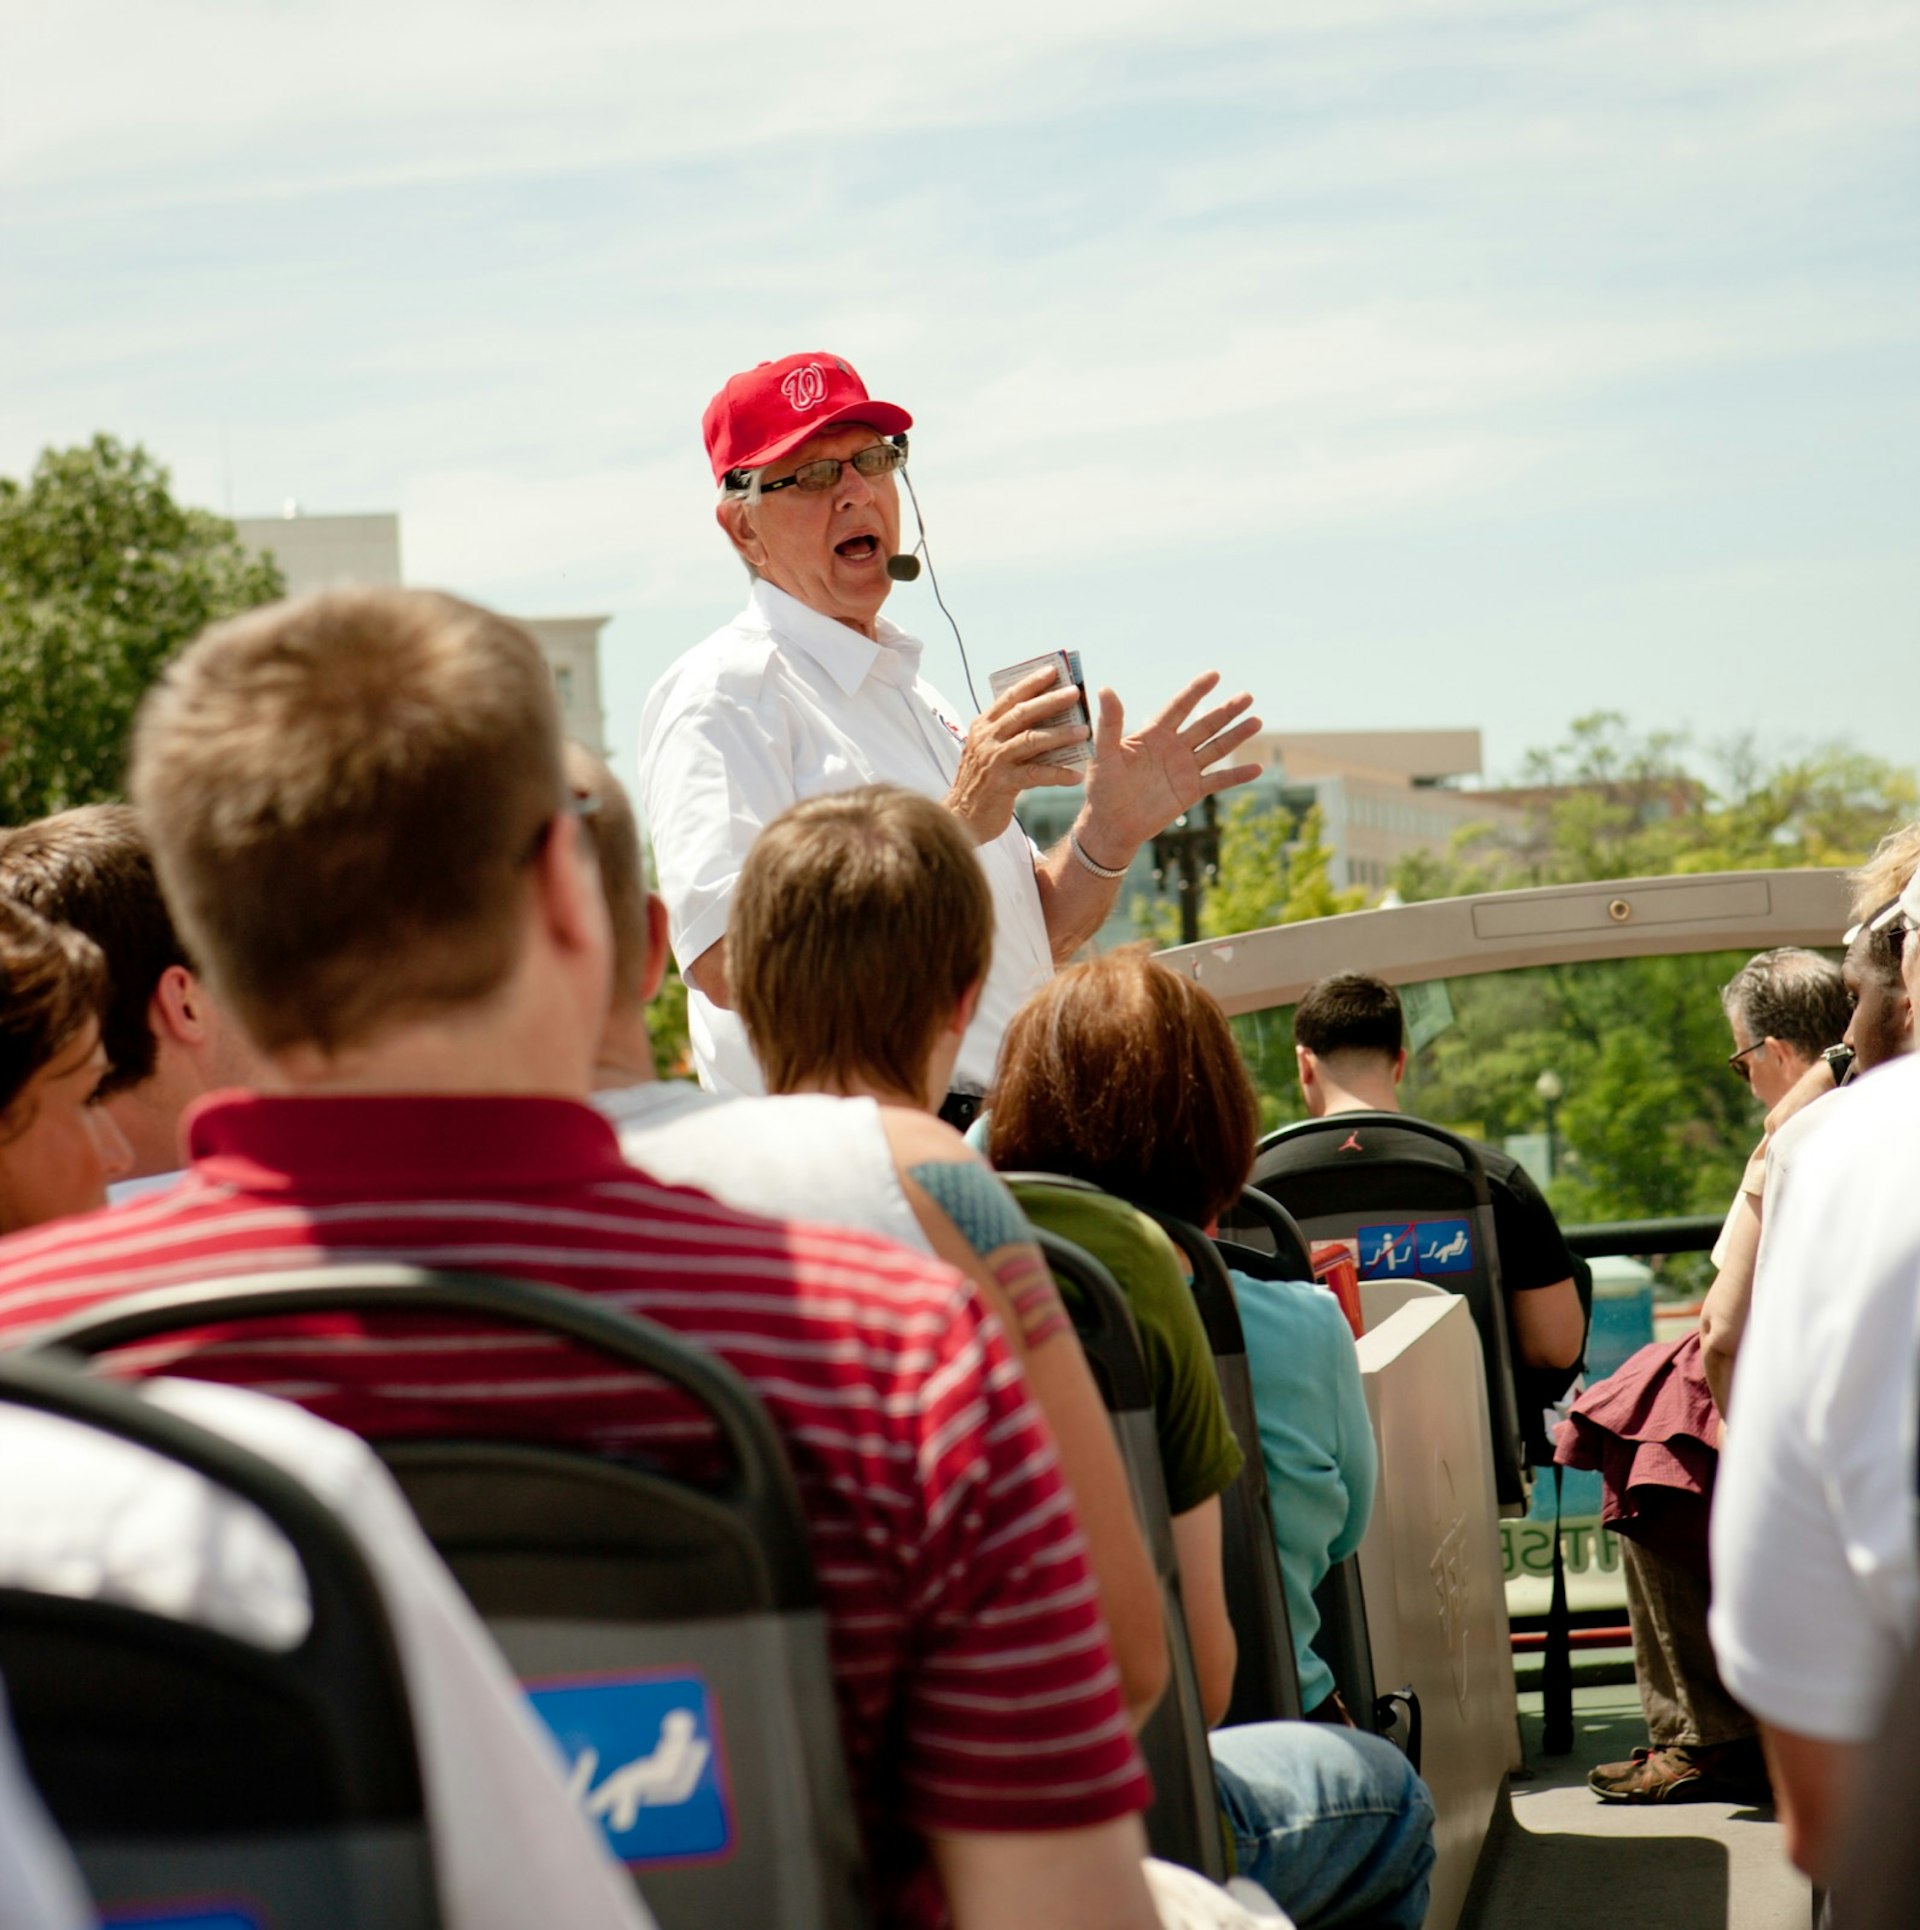 Tour guide talking about Washington to tourists on the top level of an open-air bus. The guide is wearing a red baseball cap and white shirt. The passengers backs are to the camera and it is a sunny day. 